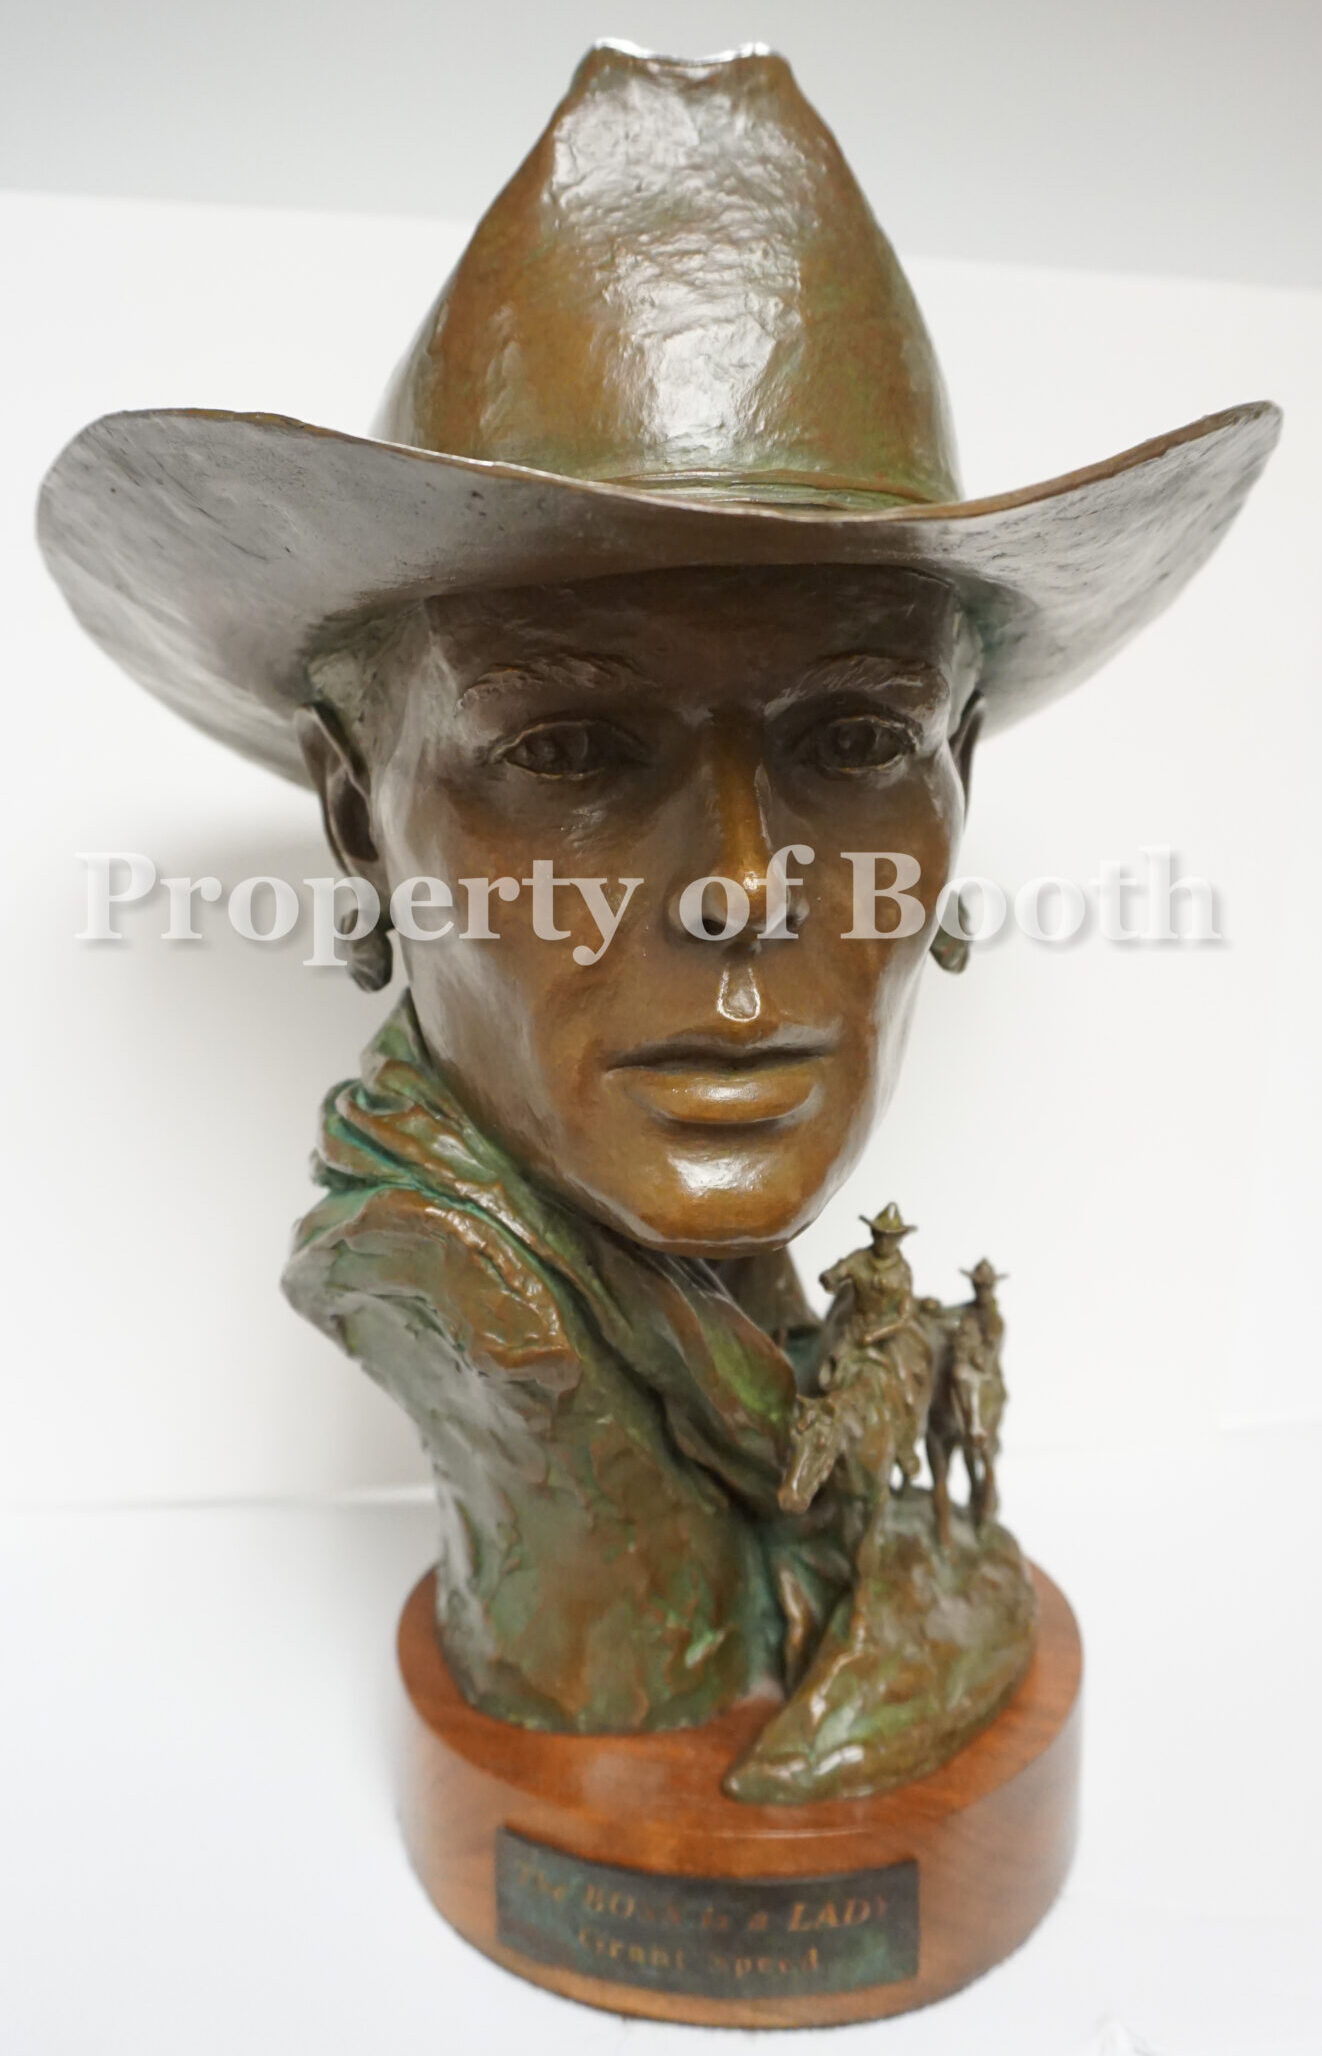 © Grant Speed, The Boss is a Lady, 1995, bronze, 15 x 12 x 10", Gift of Alan and Sherrie Schork